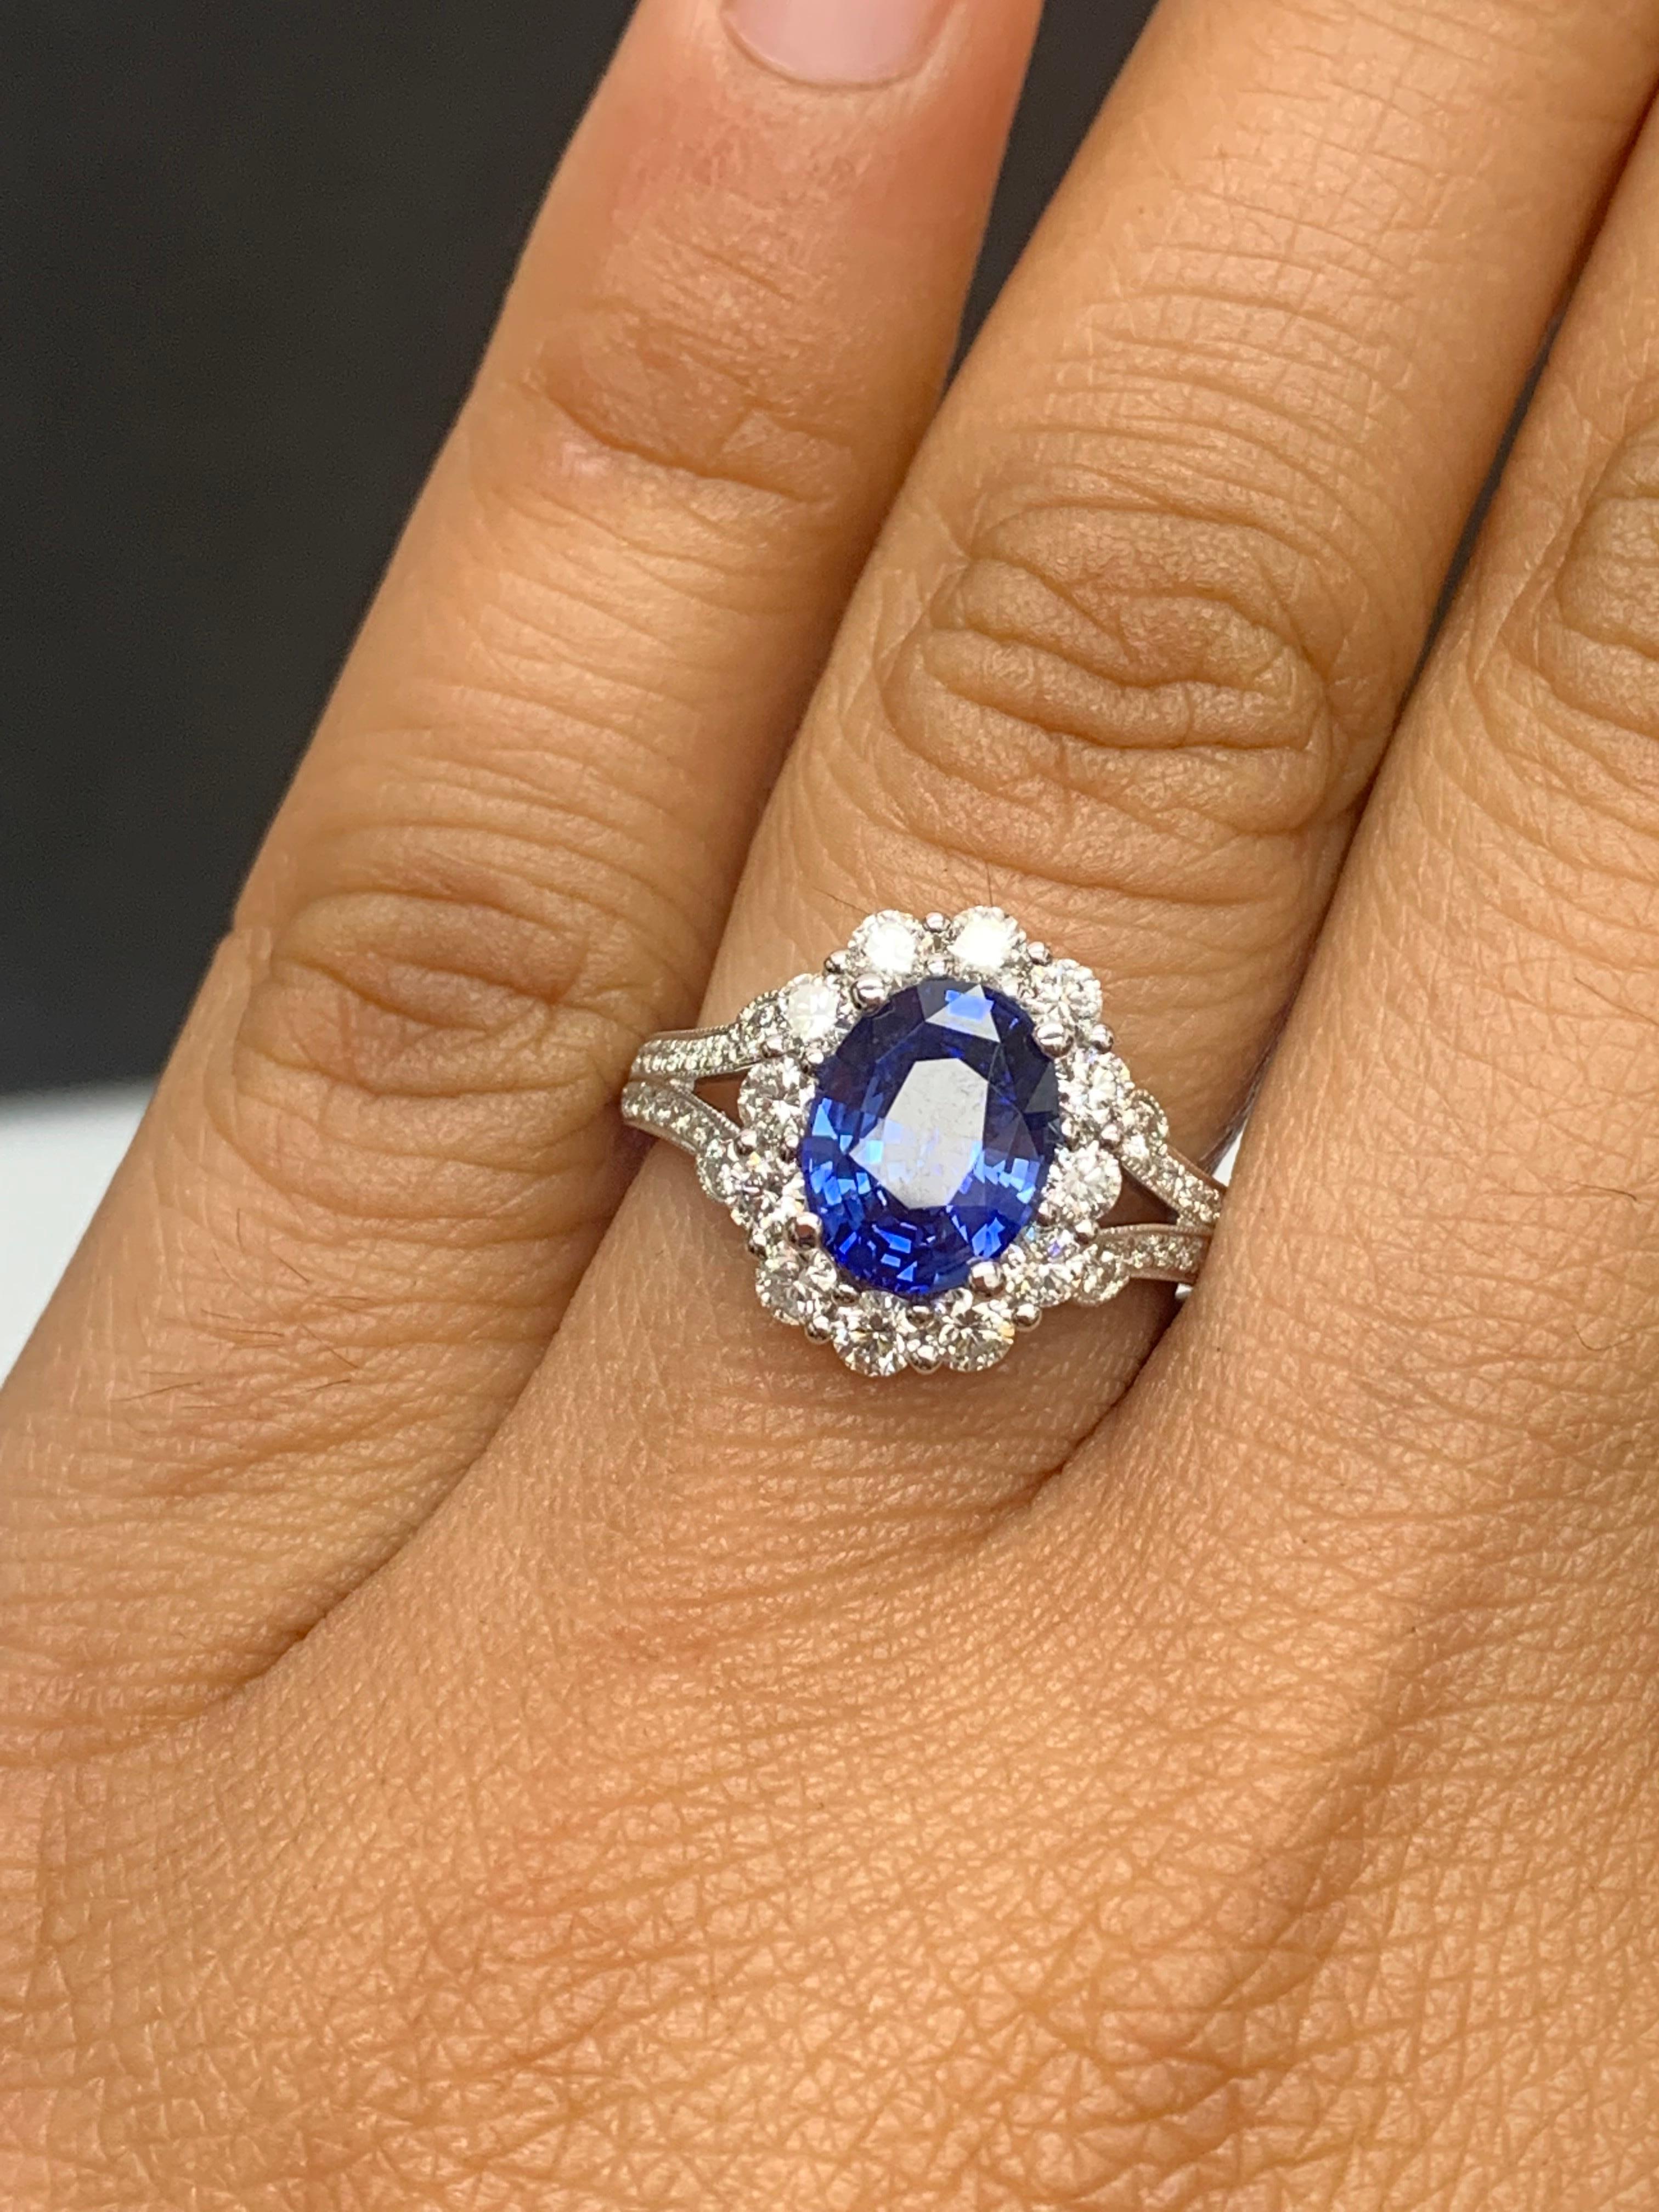 Features a gorgeous flower design  2.18 carat oval cut blue sapphire ring surrounded by a row of brilliant-cut 12 diamonds weighing 0.67 carats in total. 36 accent diamonds on the side weigh 0.28 carats. Made in 18k white gold.